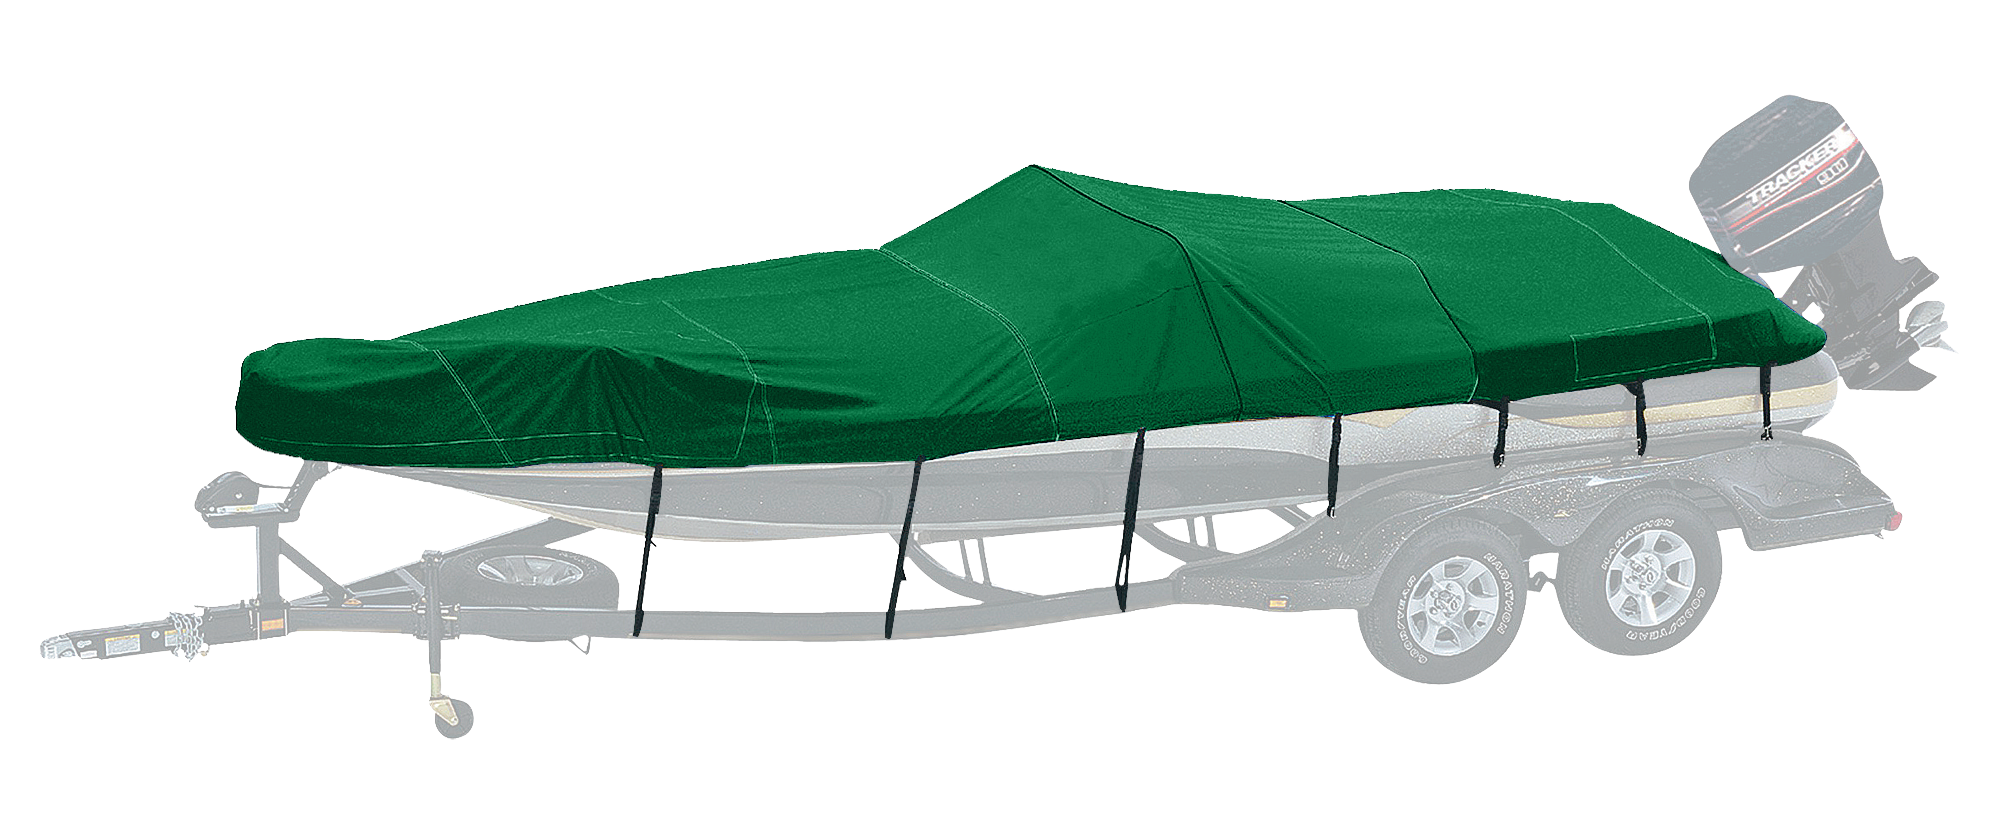 Bass Pro Shops Westland Exact Fit Boat Cover - Tahoe Boats - 2002-2005 - Q7 I/O - Forest Green